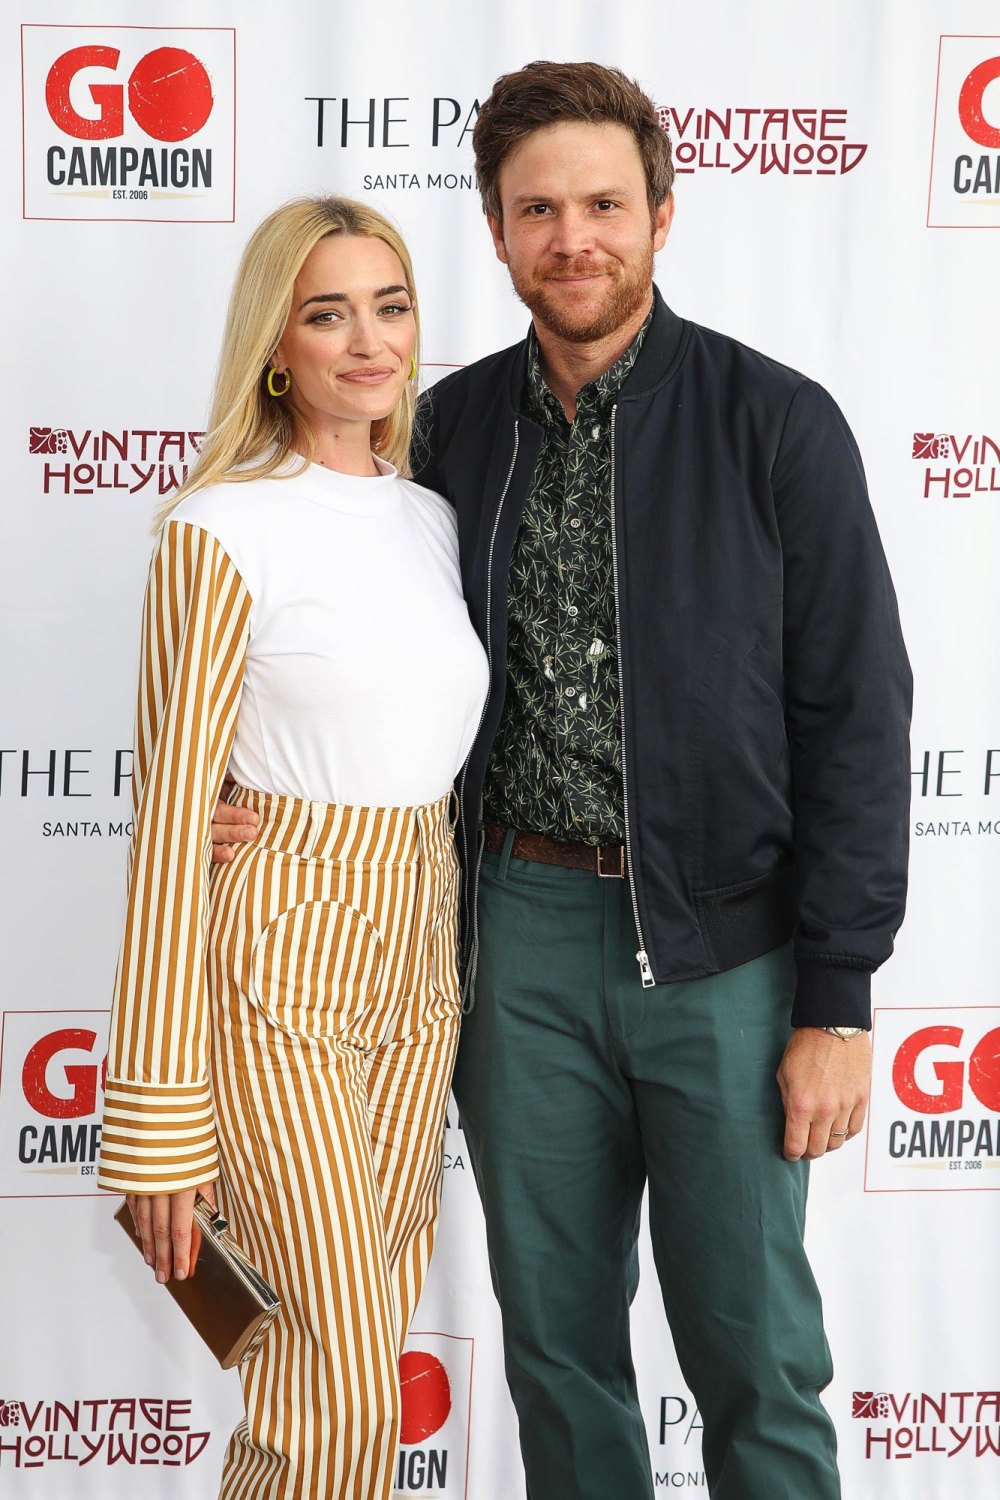 Ginny-and-Georgia-s-Brianne-Howey-and-Husband-Matt-Ziering-Welcome-1st-Baby--1st-Photo-556